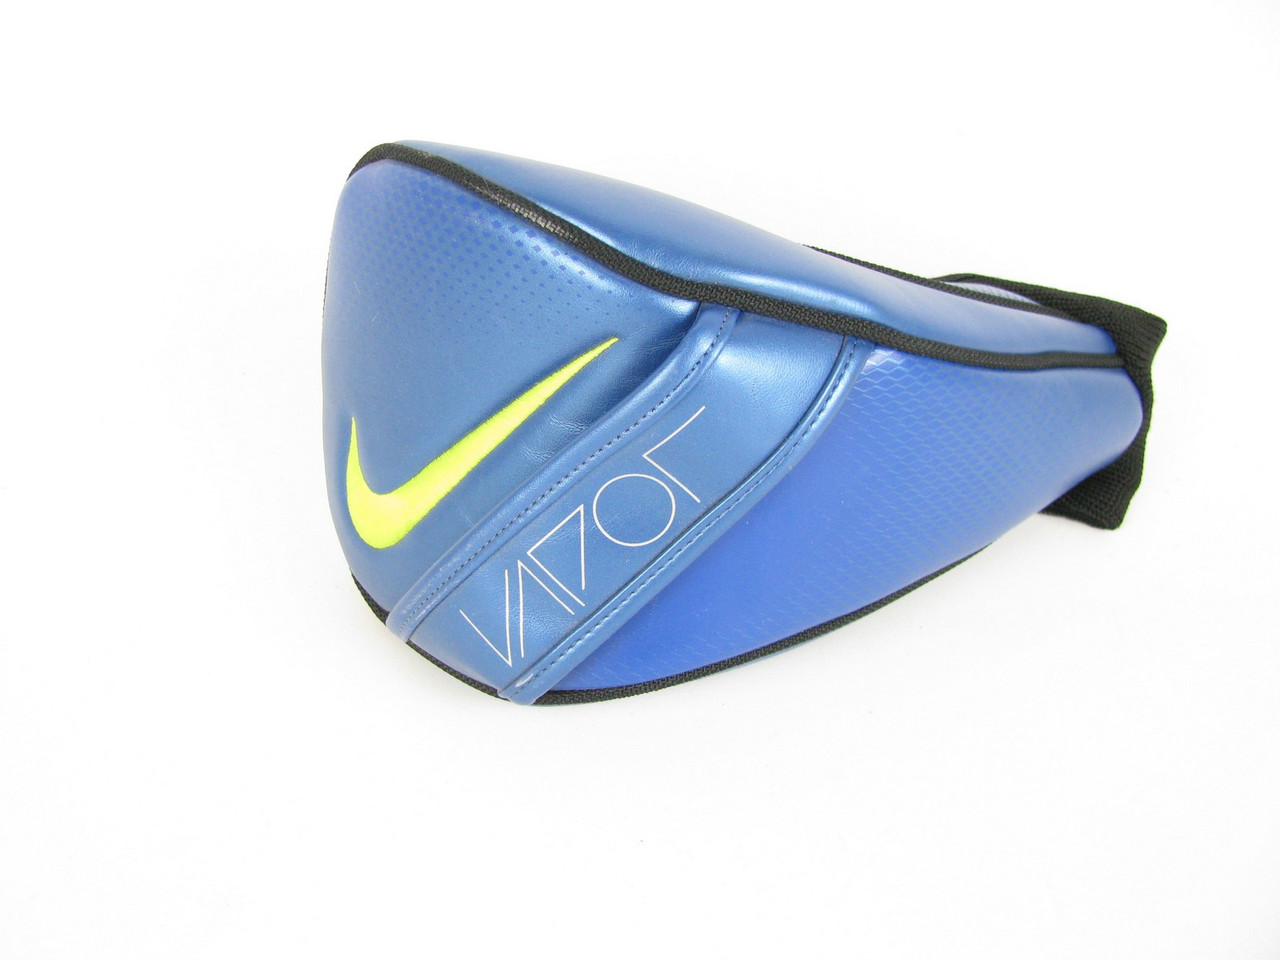 NEW Nike Vapor Fly Driver Headcover - Clubs n Covers Golf